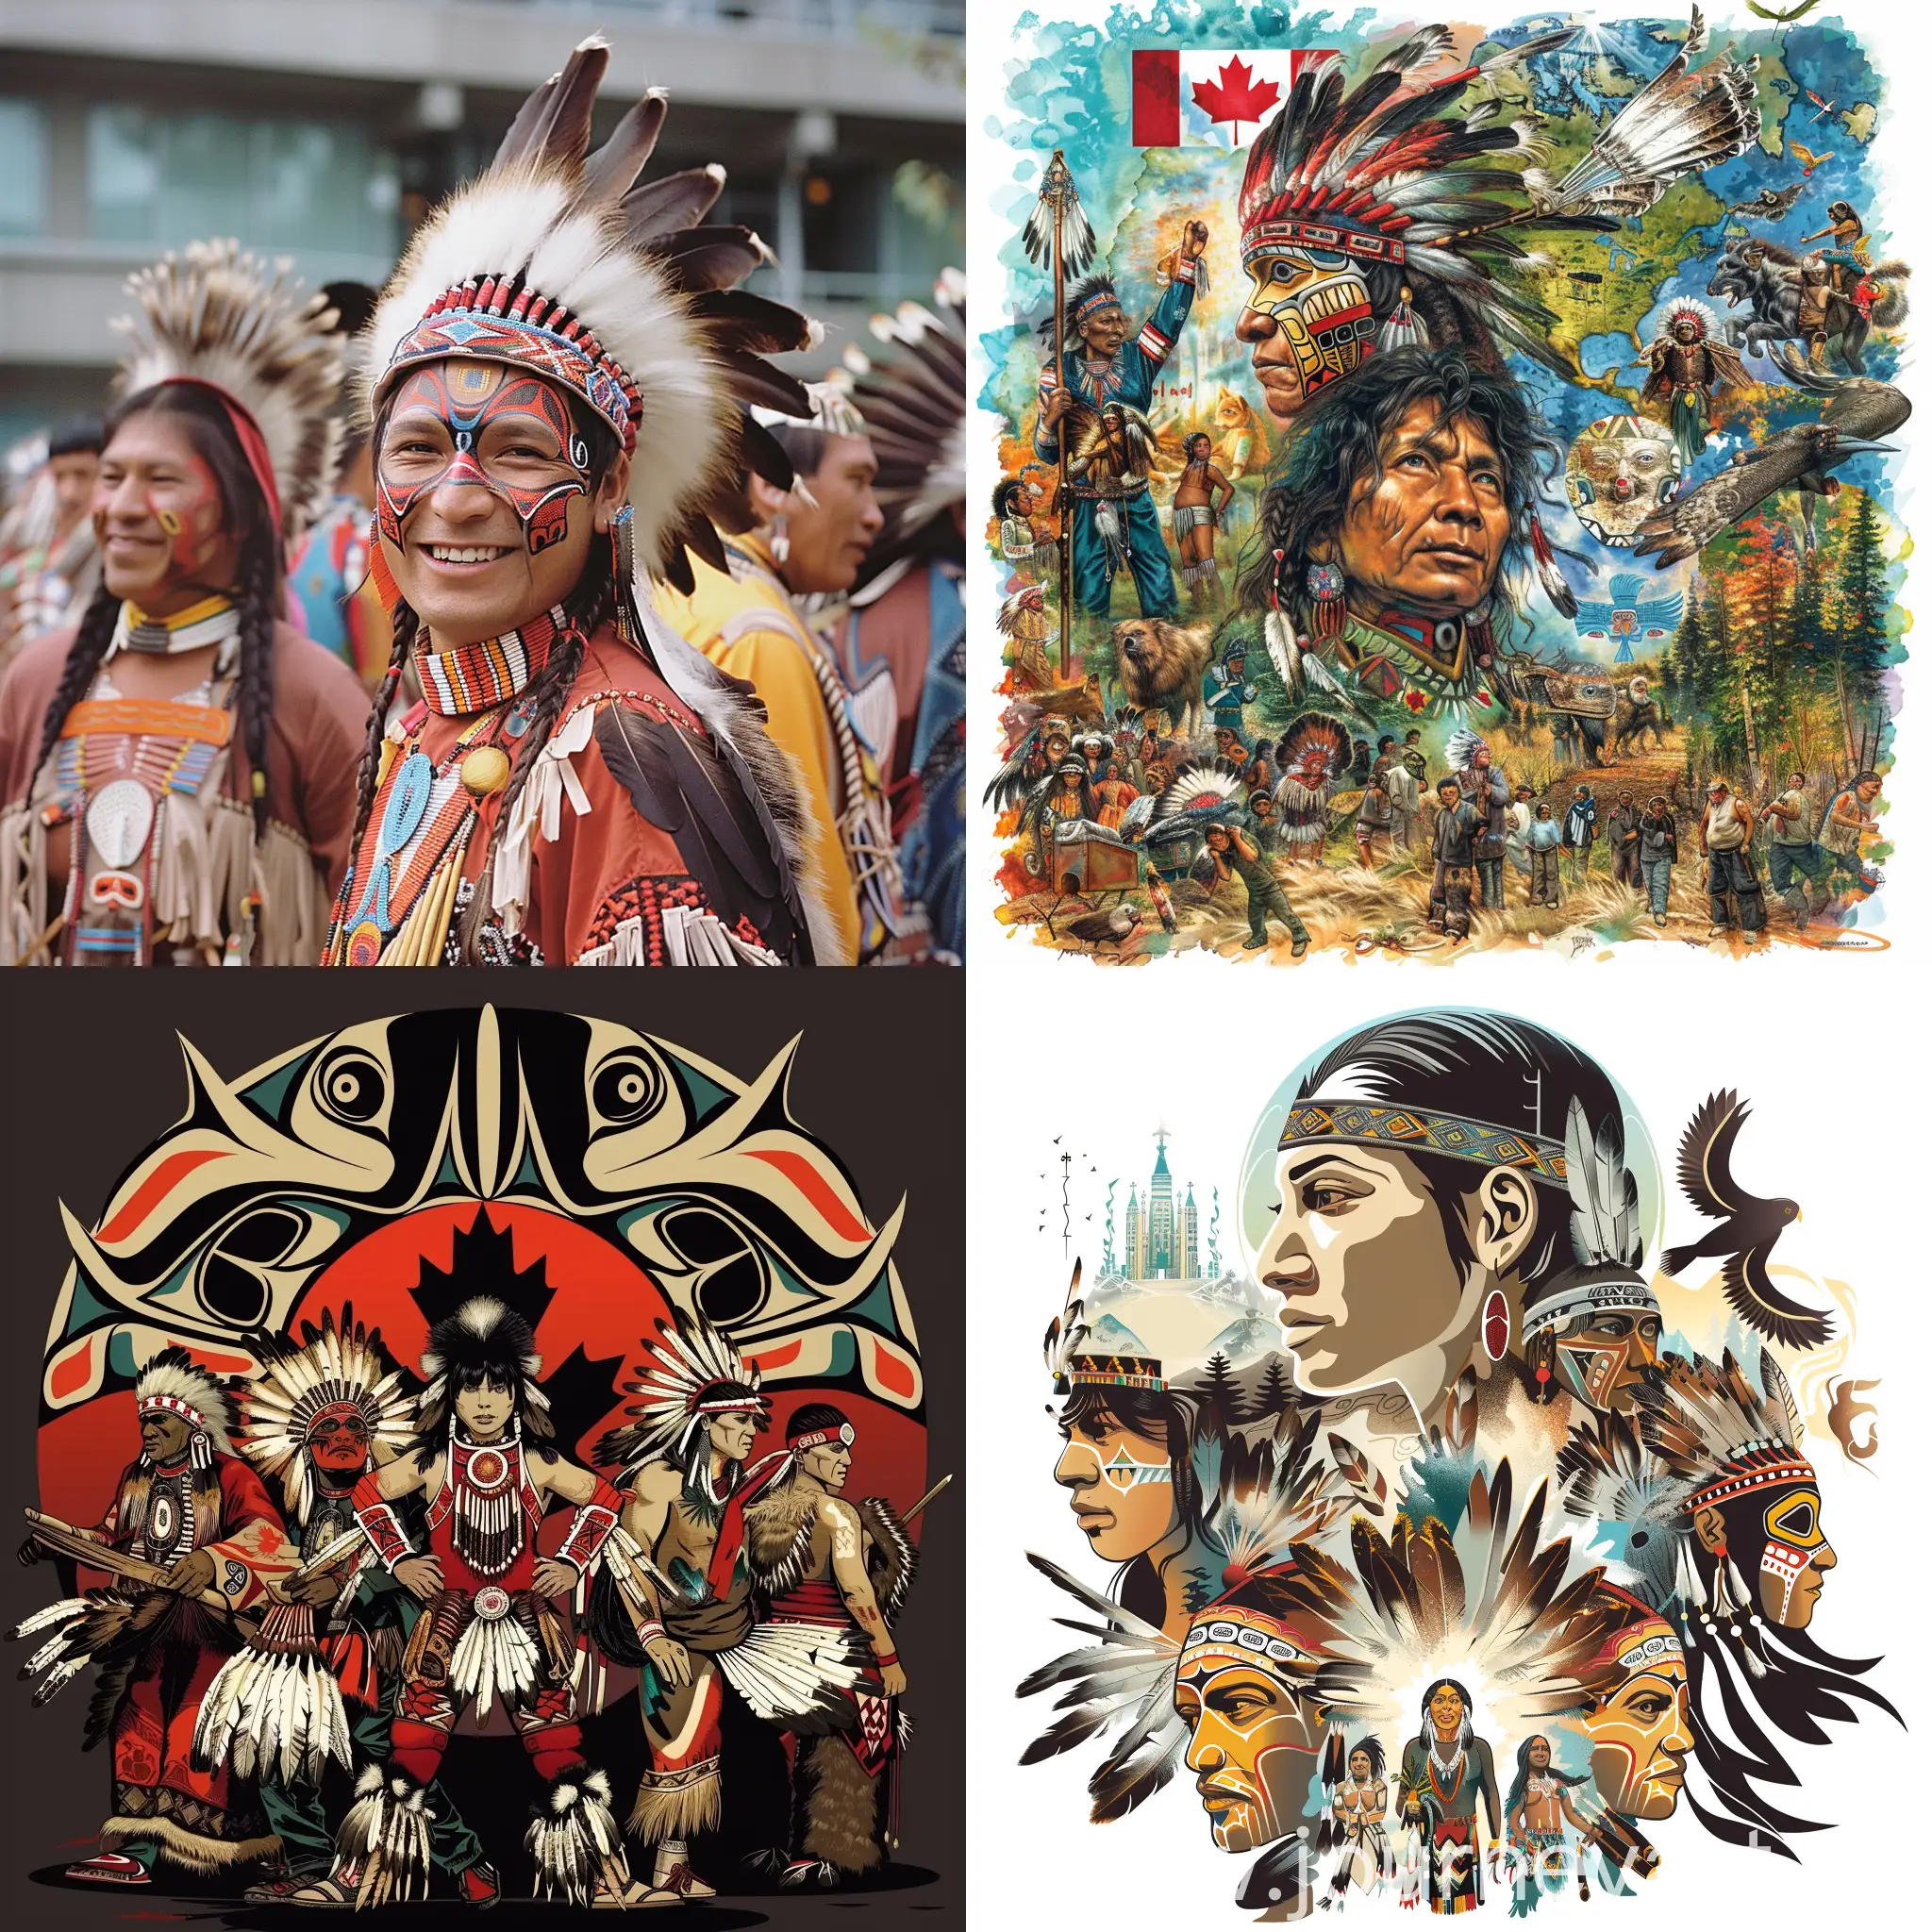 Celebrating-Indigenous-Culture-Vibrant-Contributions-to-Canadian-Society